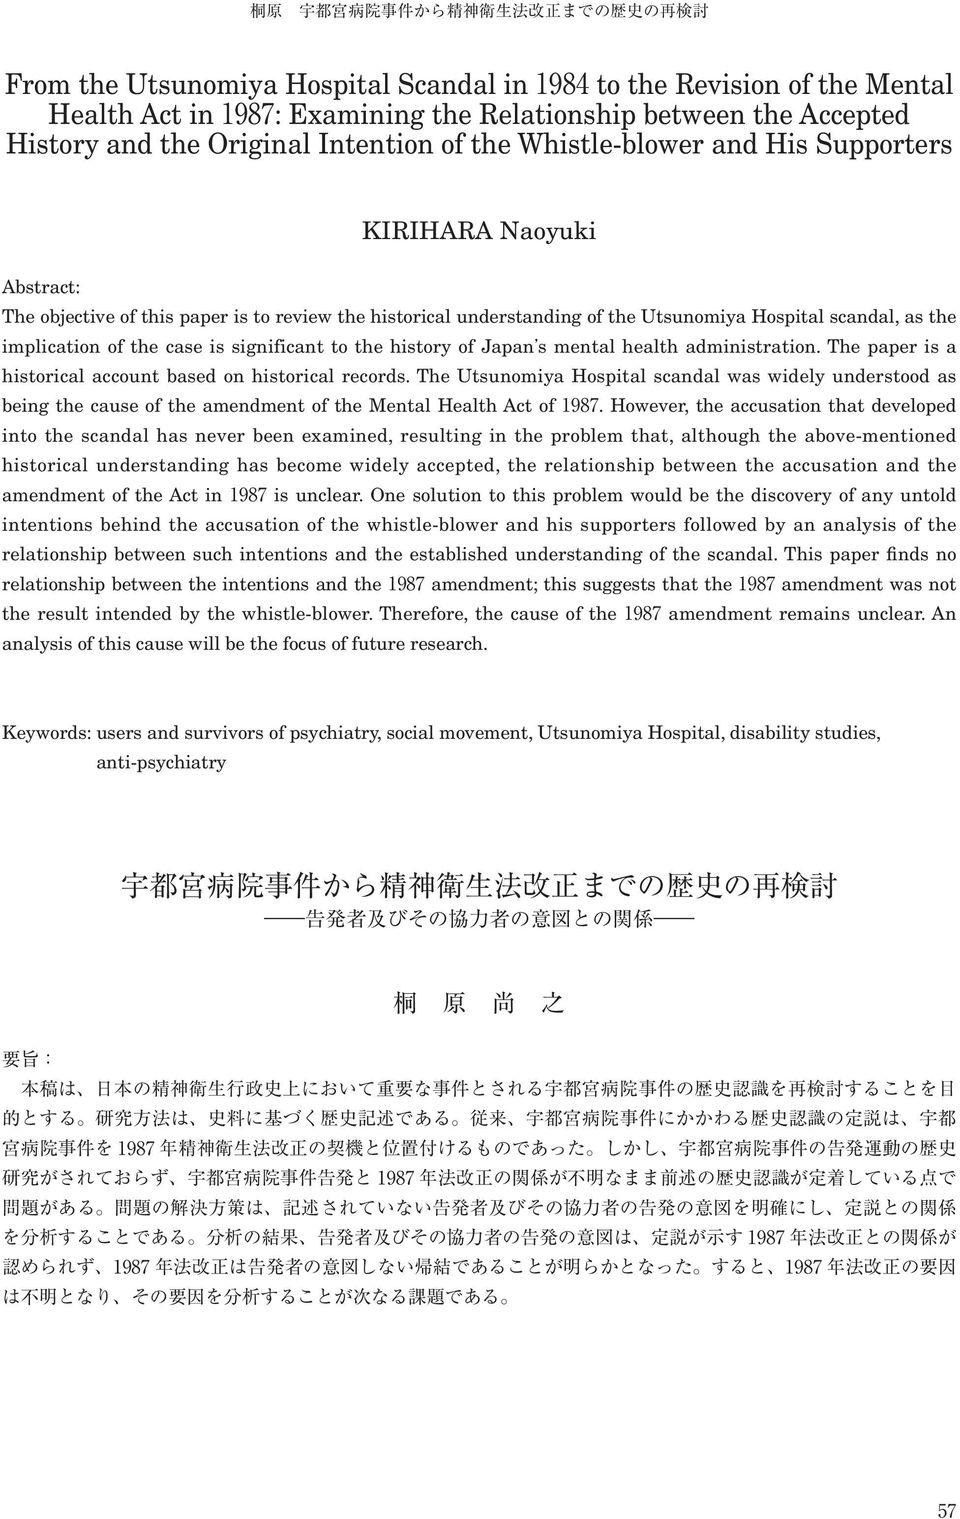 history of Japan s mental health administration. The paper is a historical account based on historical records.